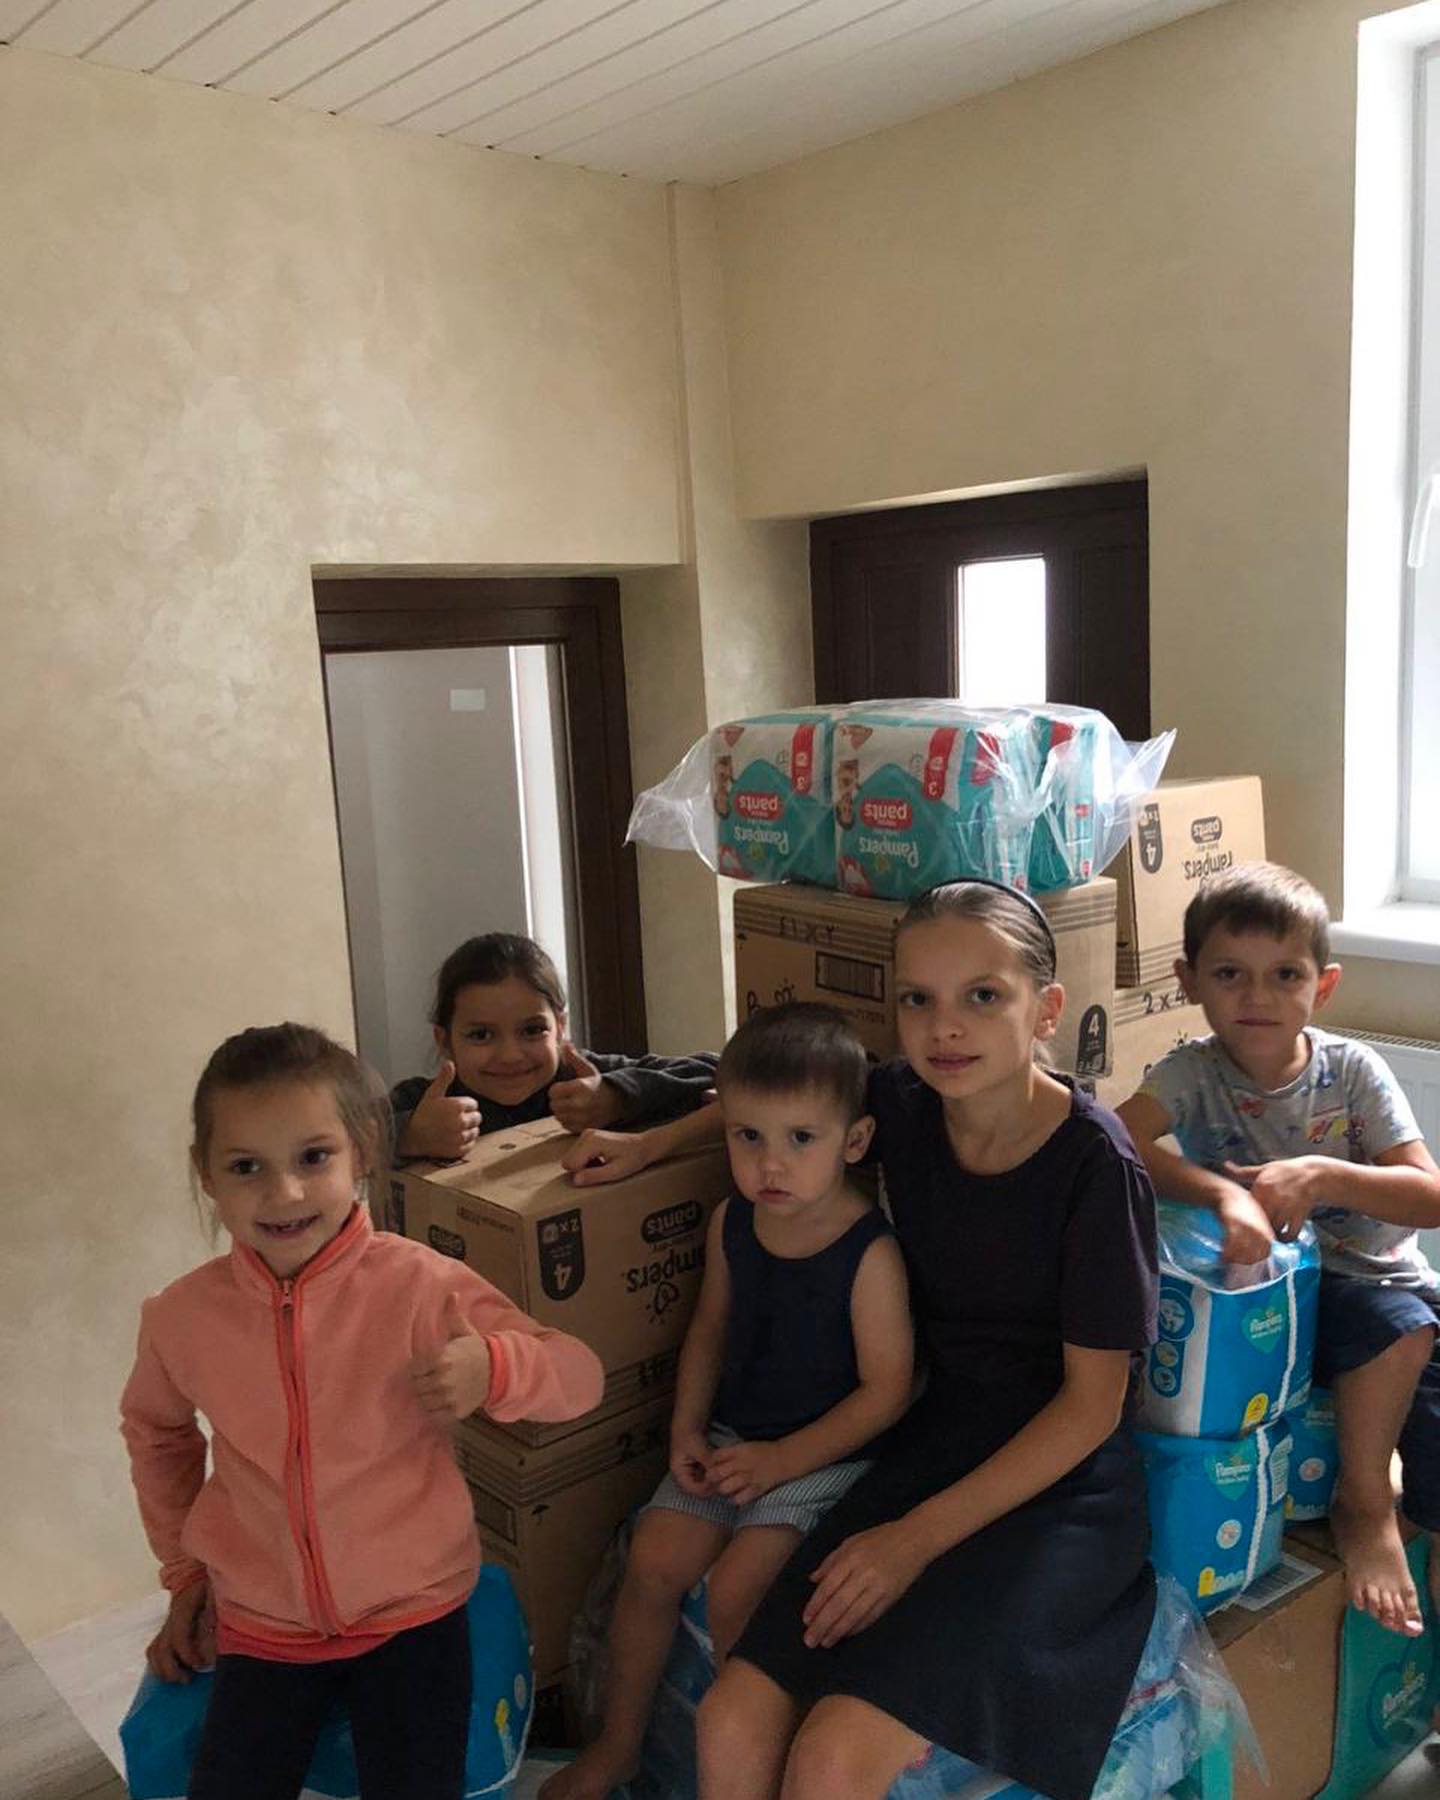 A group of children posing with boxes of diapers.